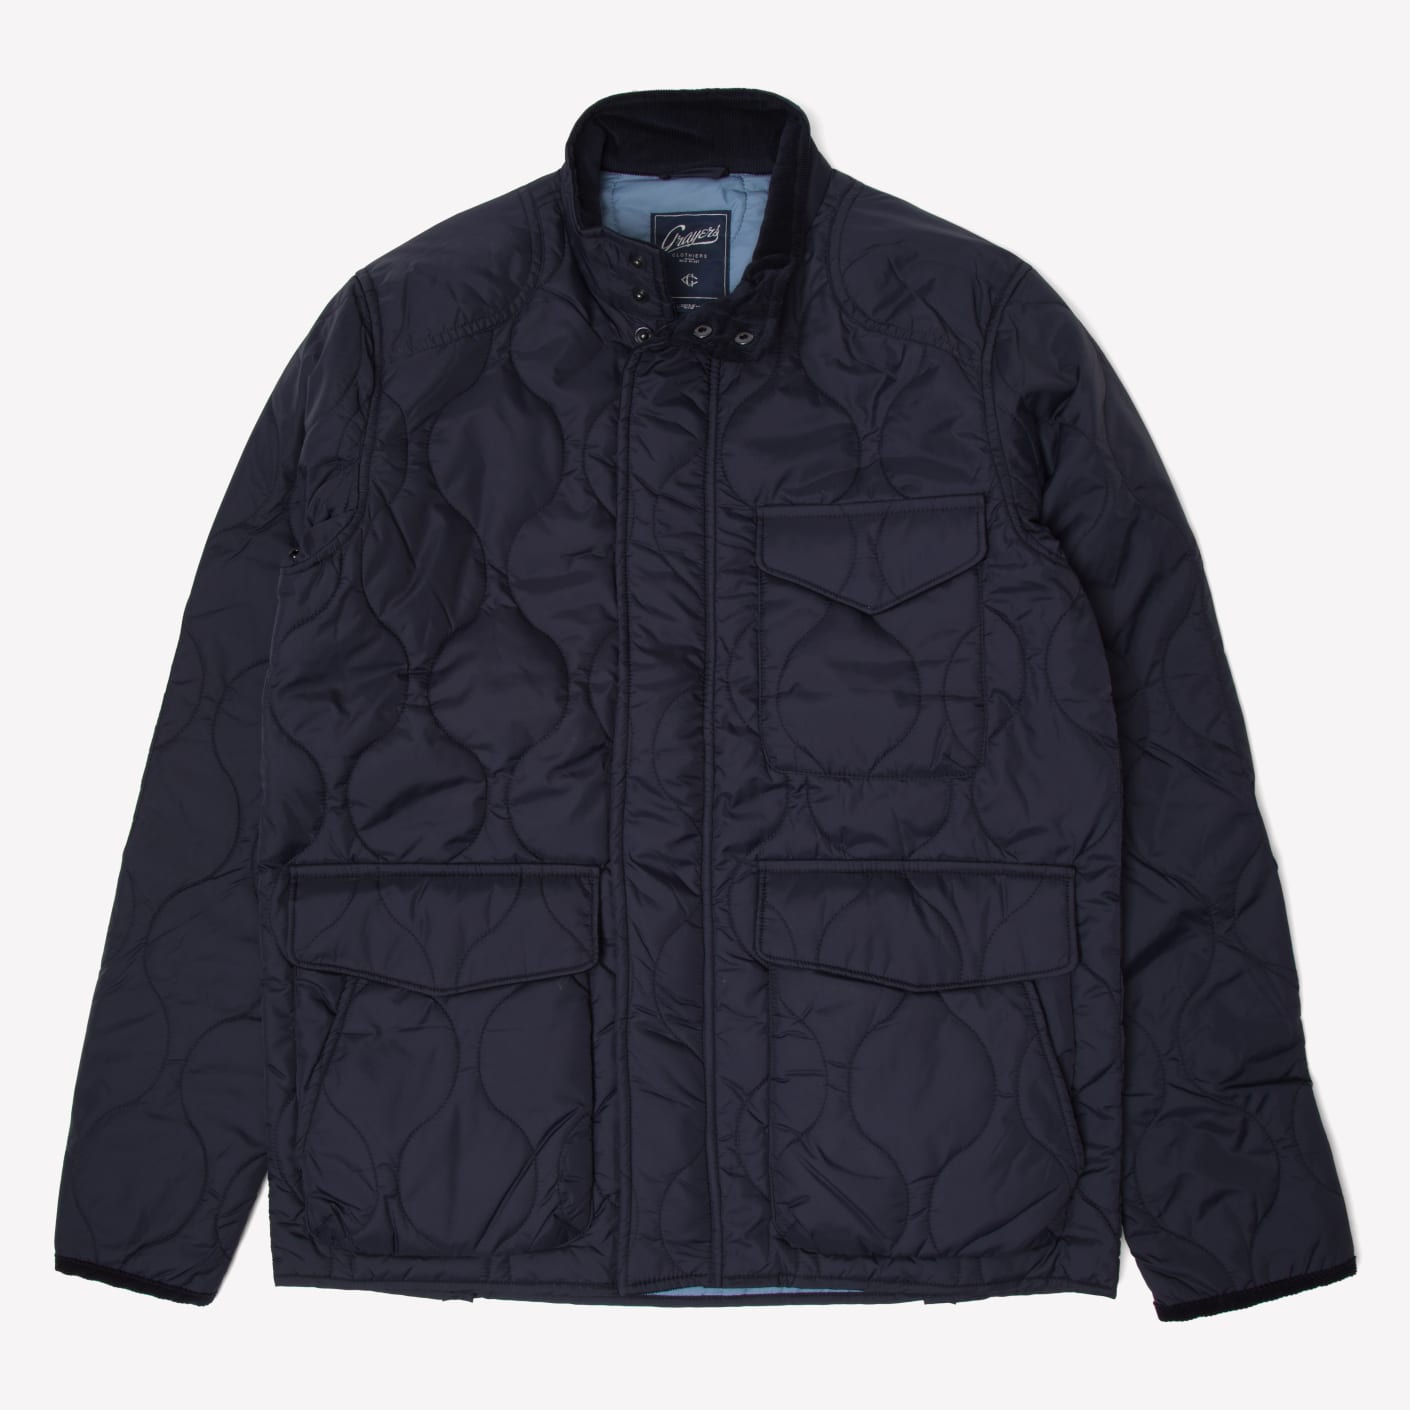 Grayers Reston Quilted Jacket | Bespoke Post